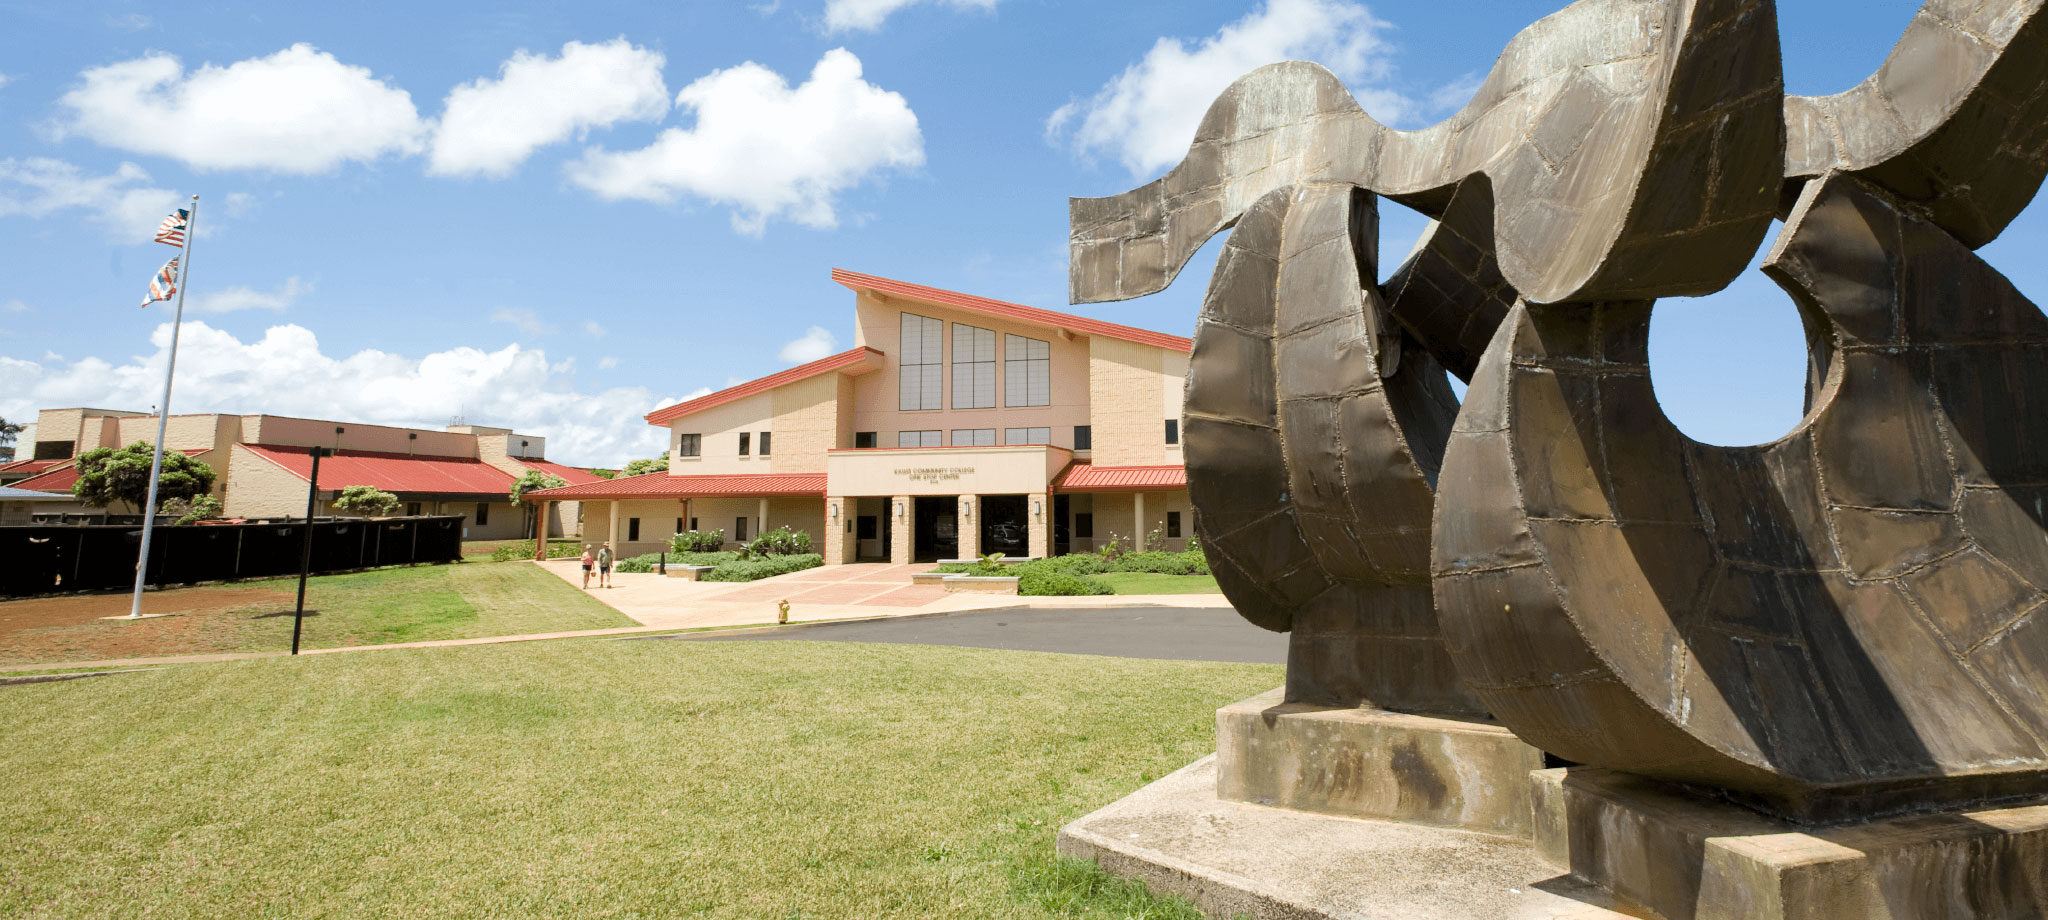 Kauai Community College campus with sculpture by Bumpei Akaji in the foreground